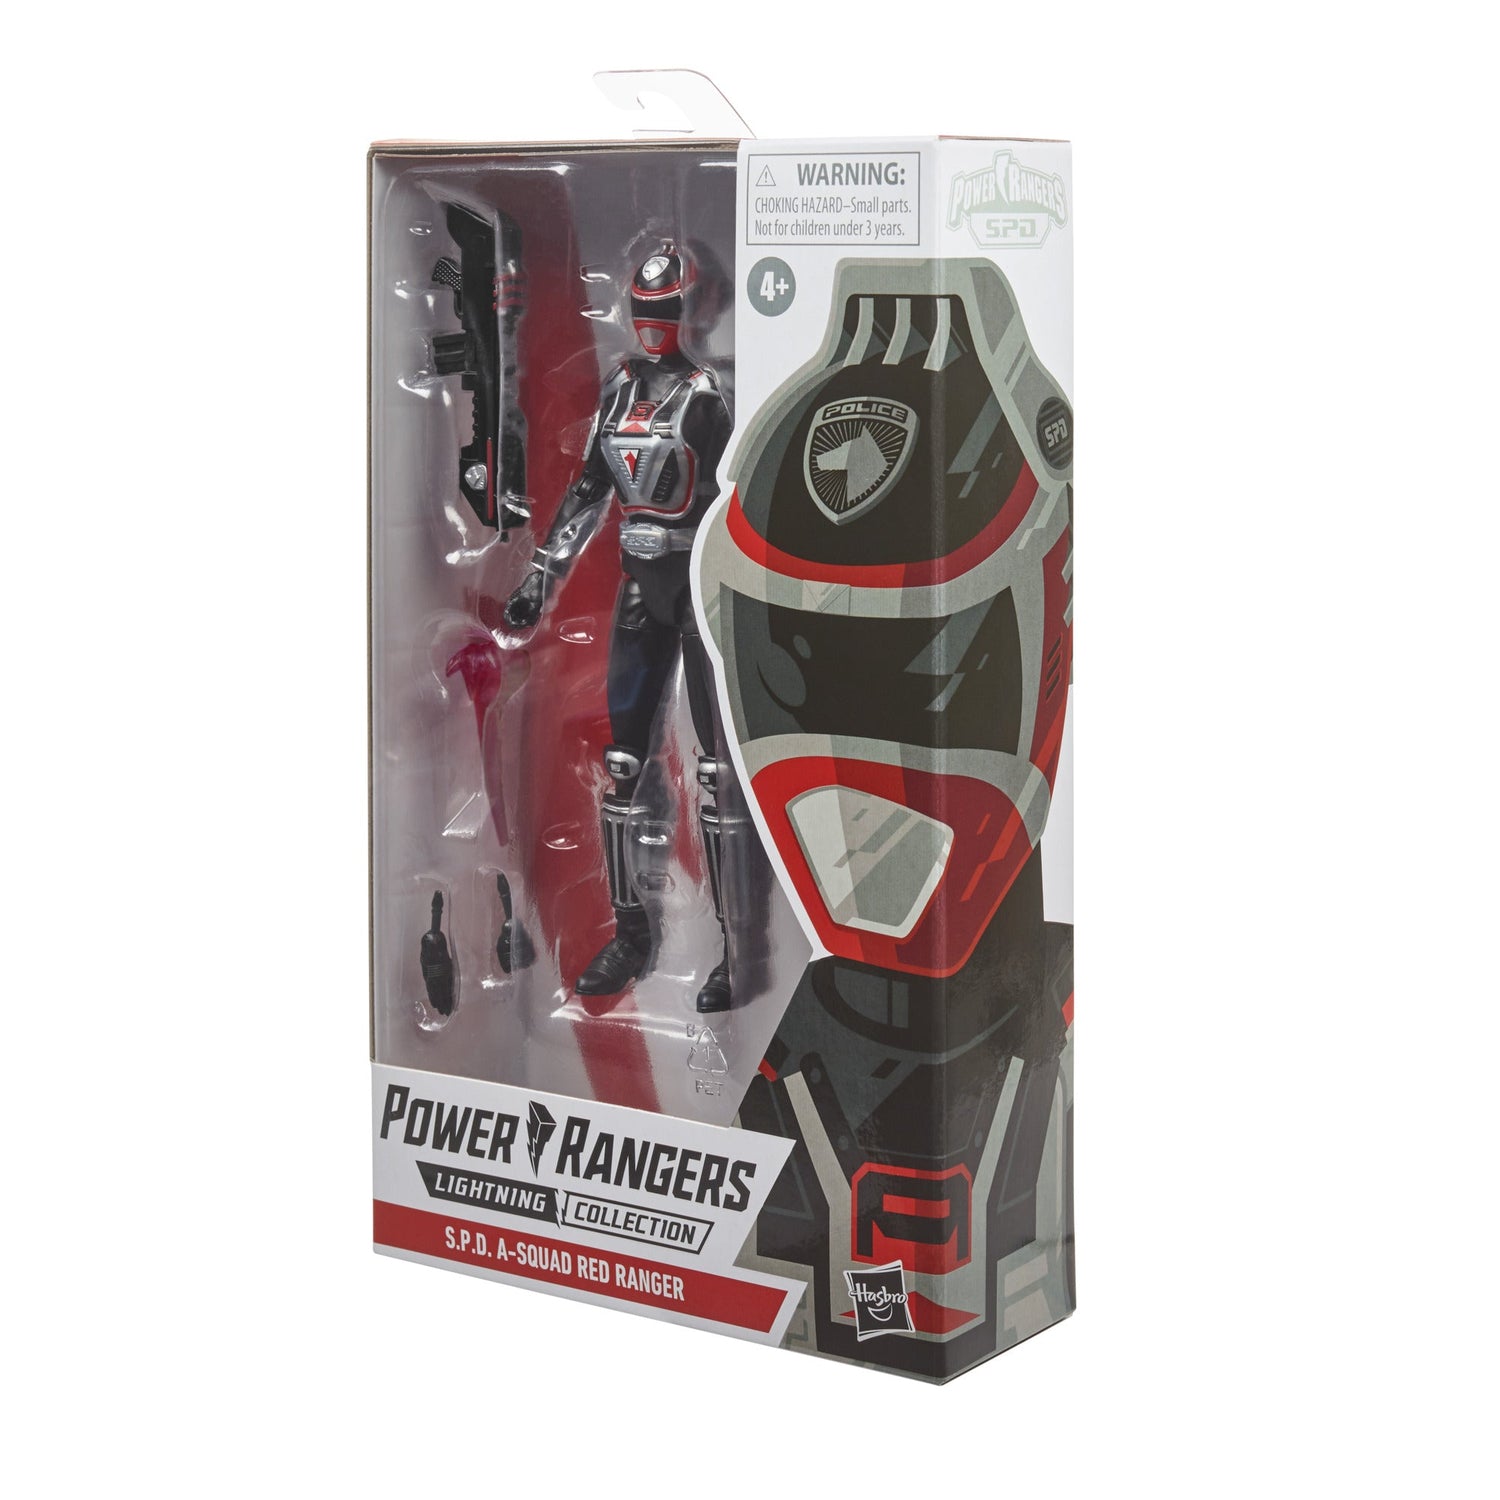 Power Rangers Lightning Collection S.P.D. A-Squad Red Ranger Action Figure